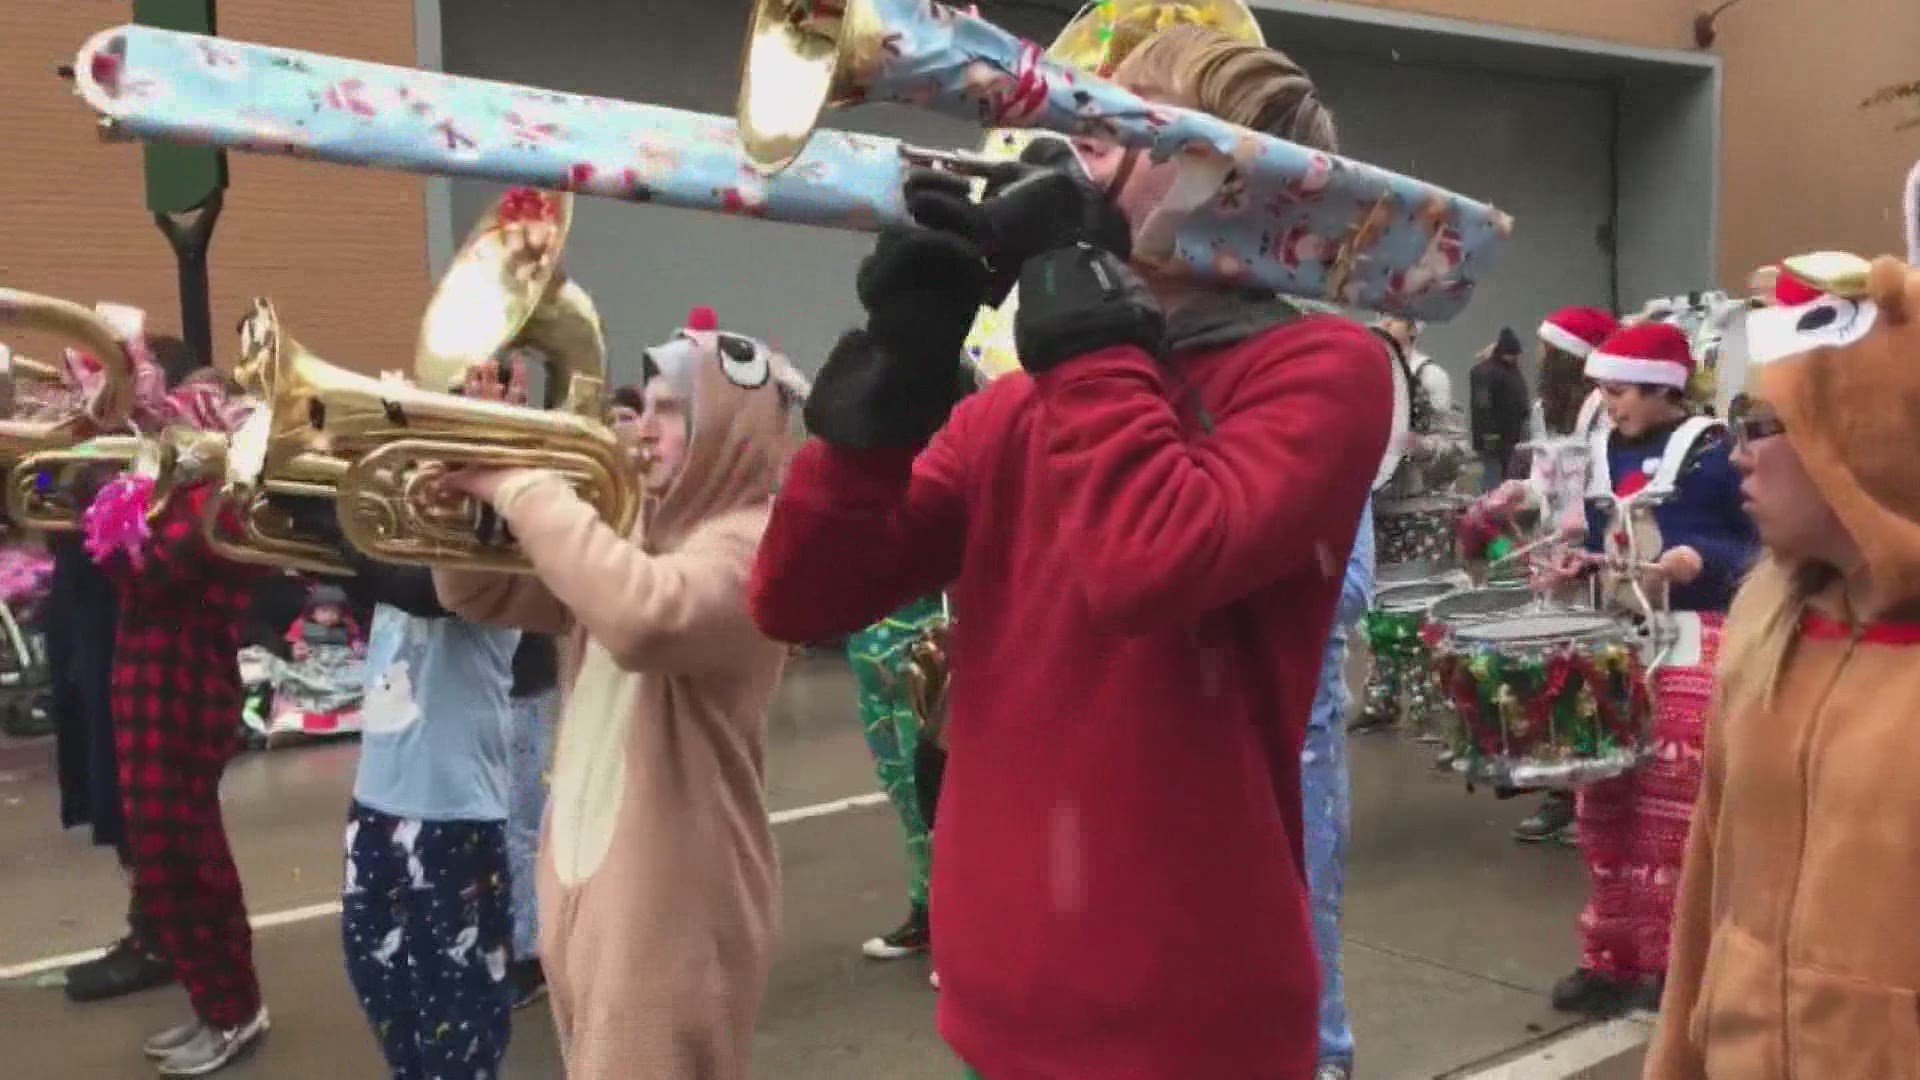 Thursday, the Grand Rapids Junior Chamber announced the 2020 Santa Parade has been canceled this year due to COVID-19 concerns.